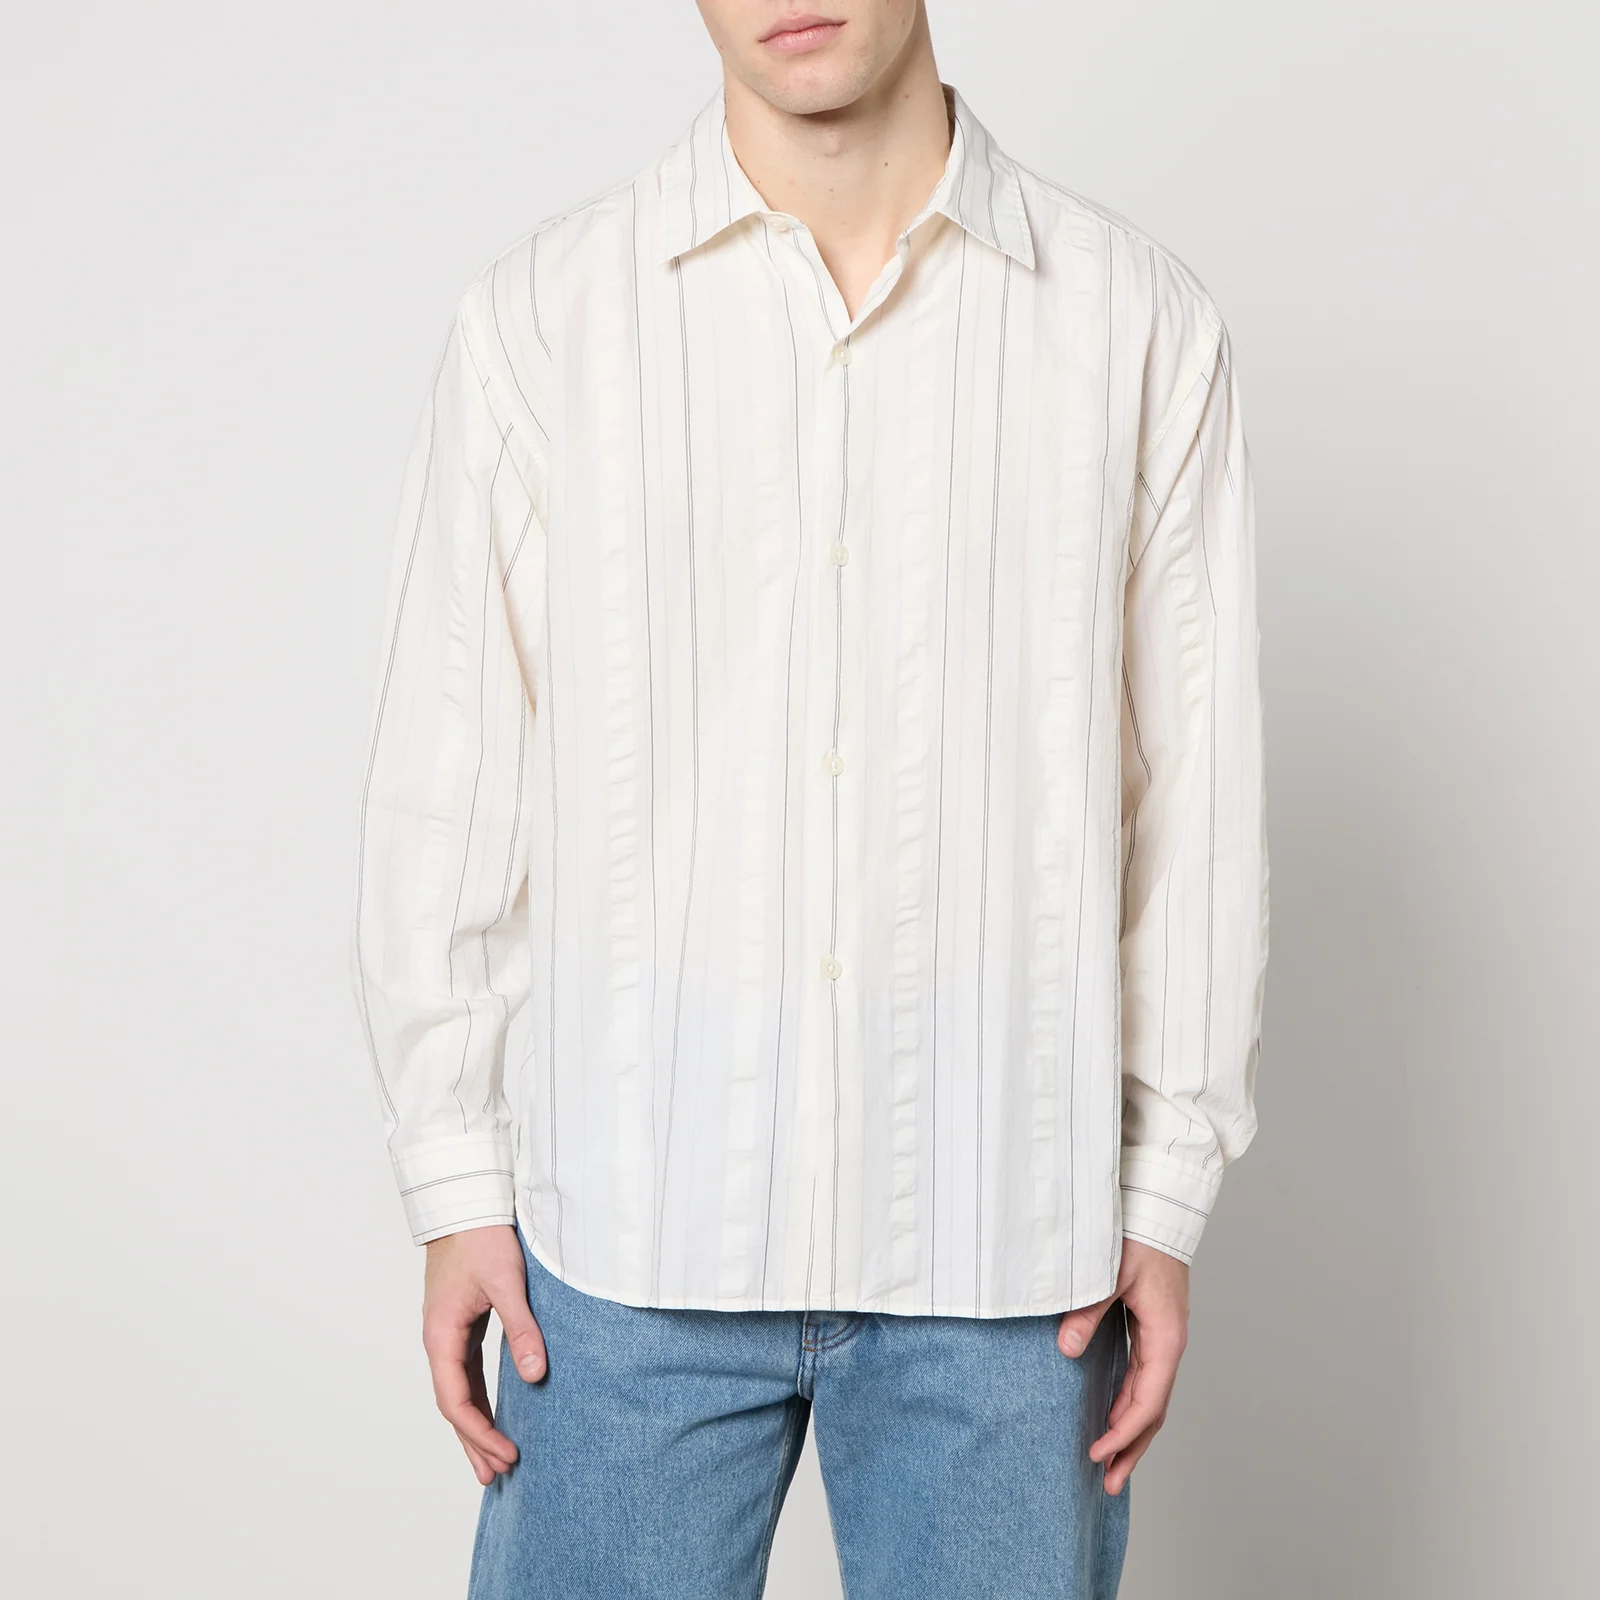 mfpen Generous Puckered Pinstriped Recycled Cotton Shirt - M Image 1